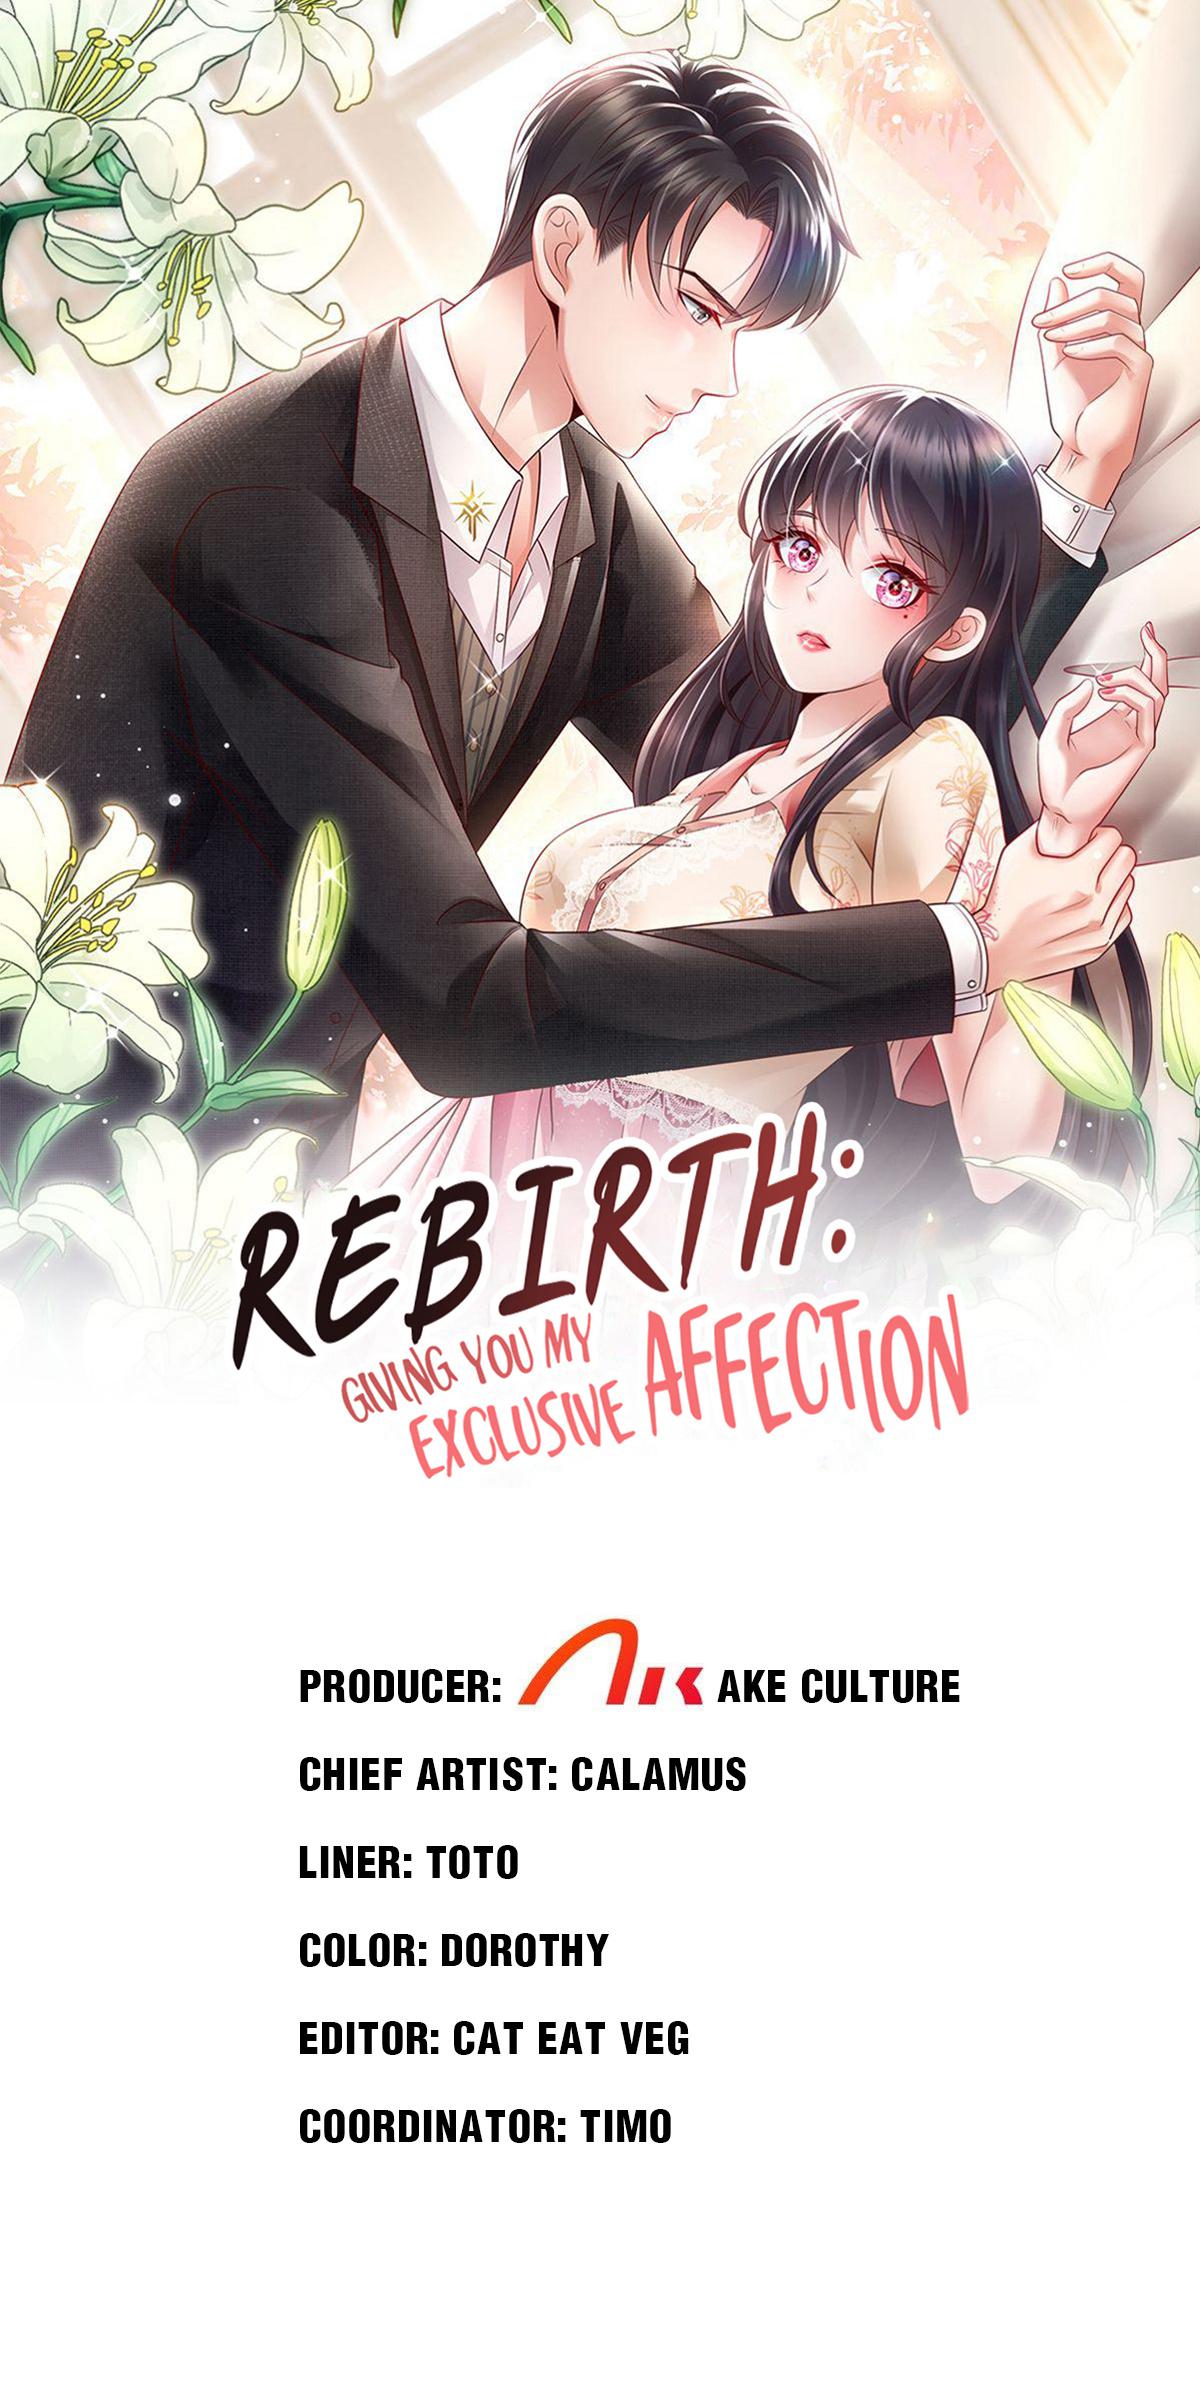 Rebirth: Giving You My Exclusive Affection 153